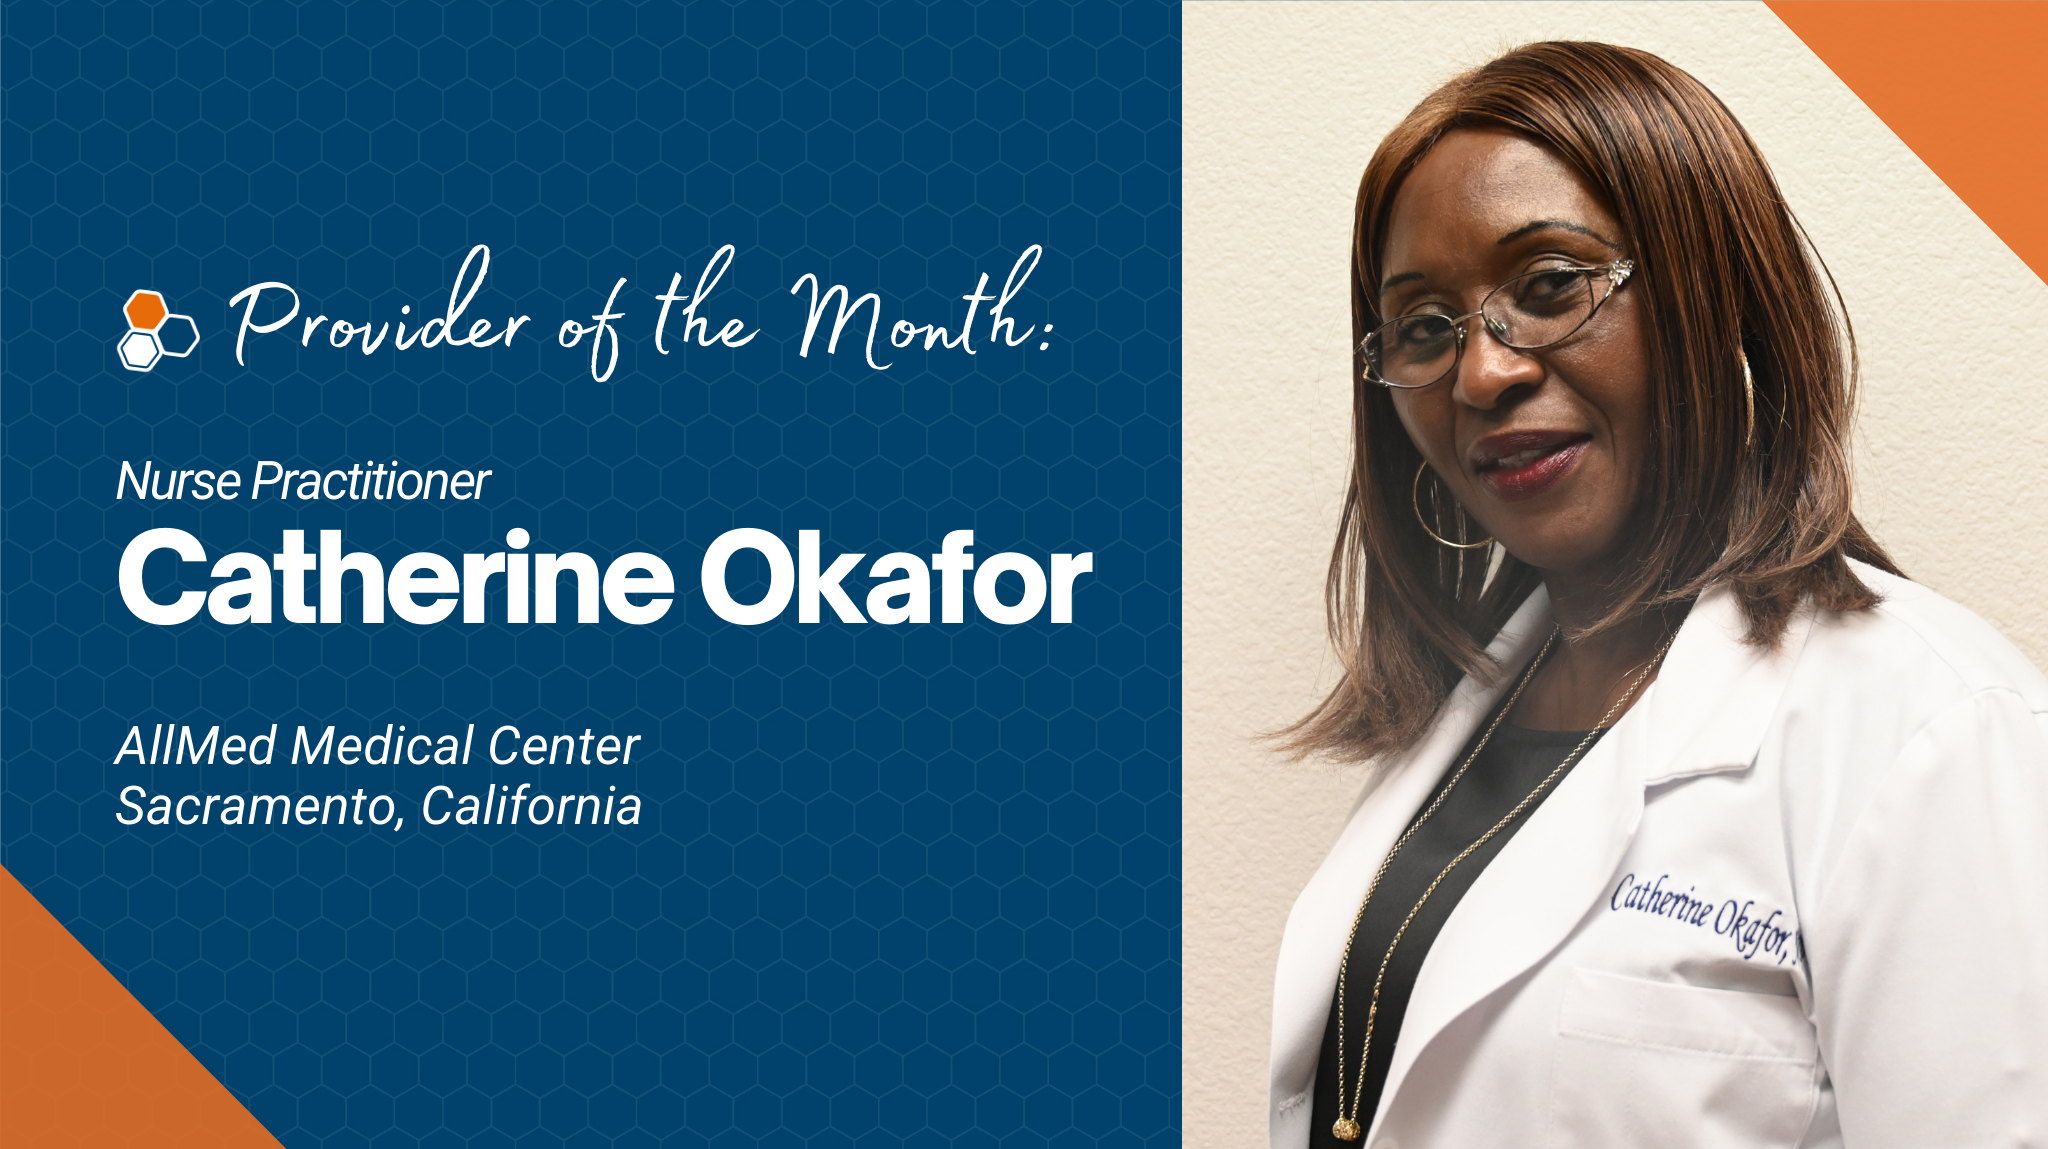 Catherine Okafor Is a Nurse Practitioner in Sacramento and Meditab's Provider of the Month